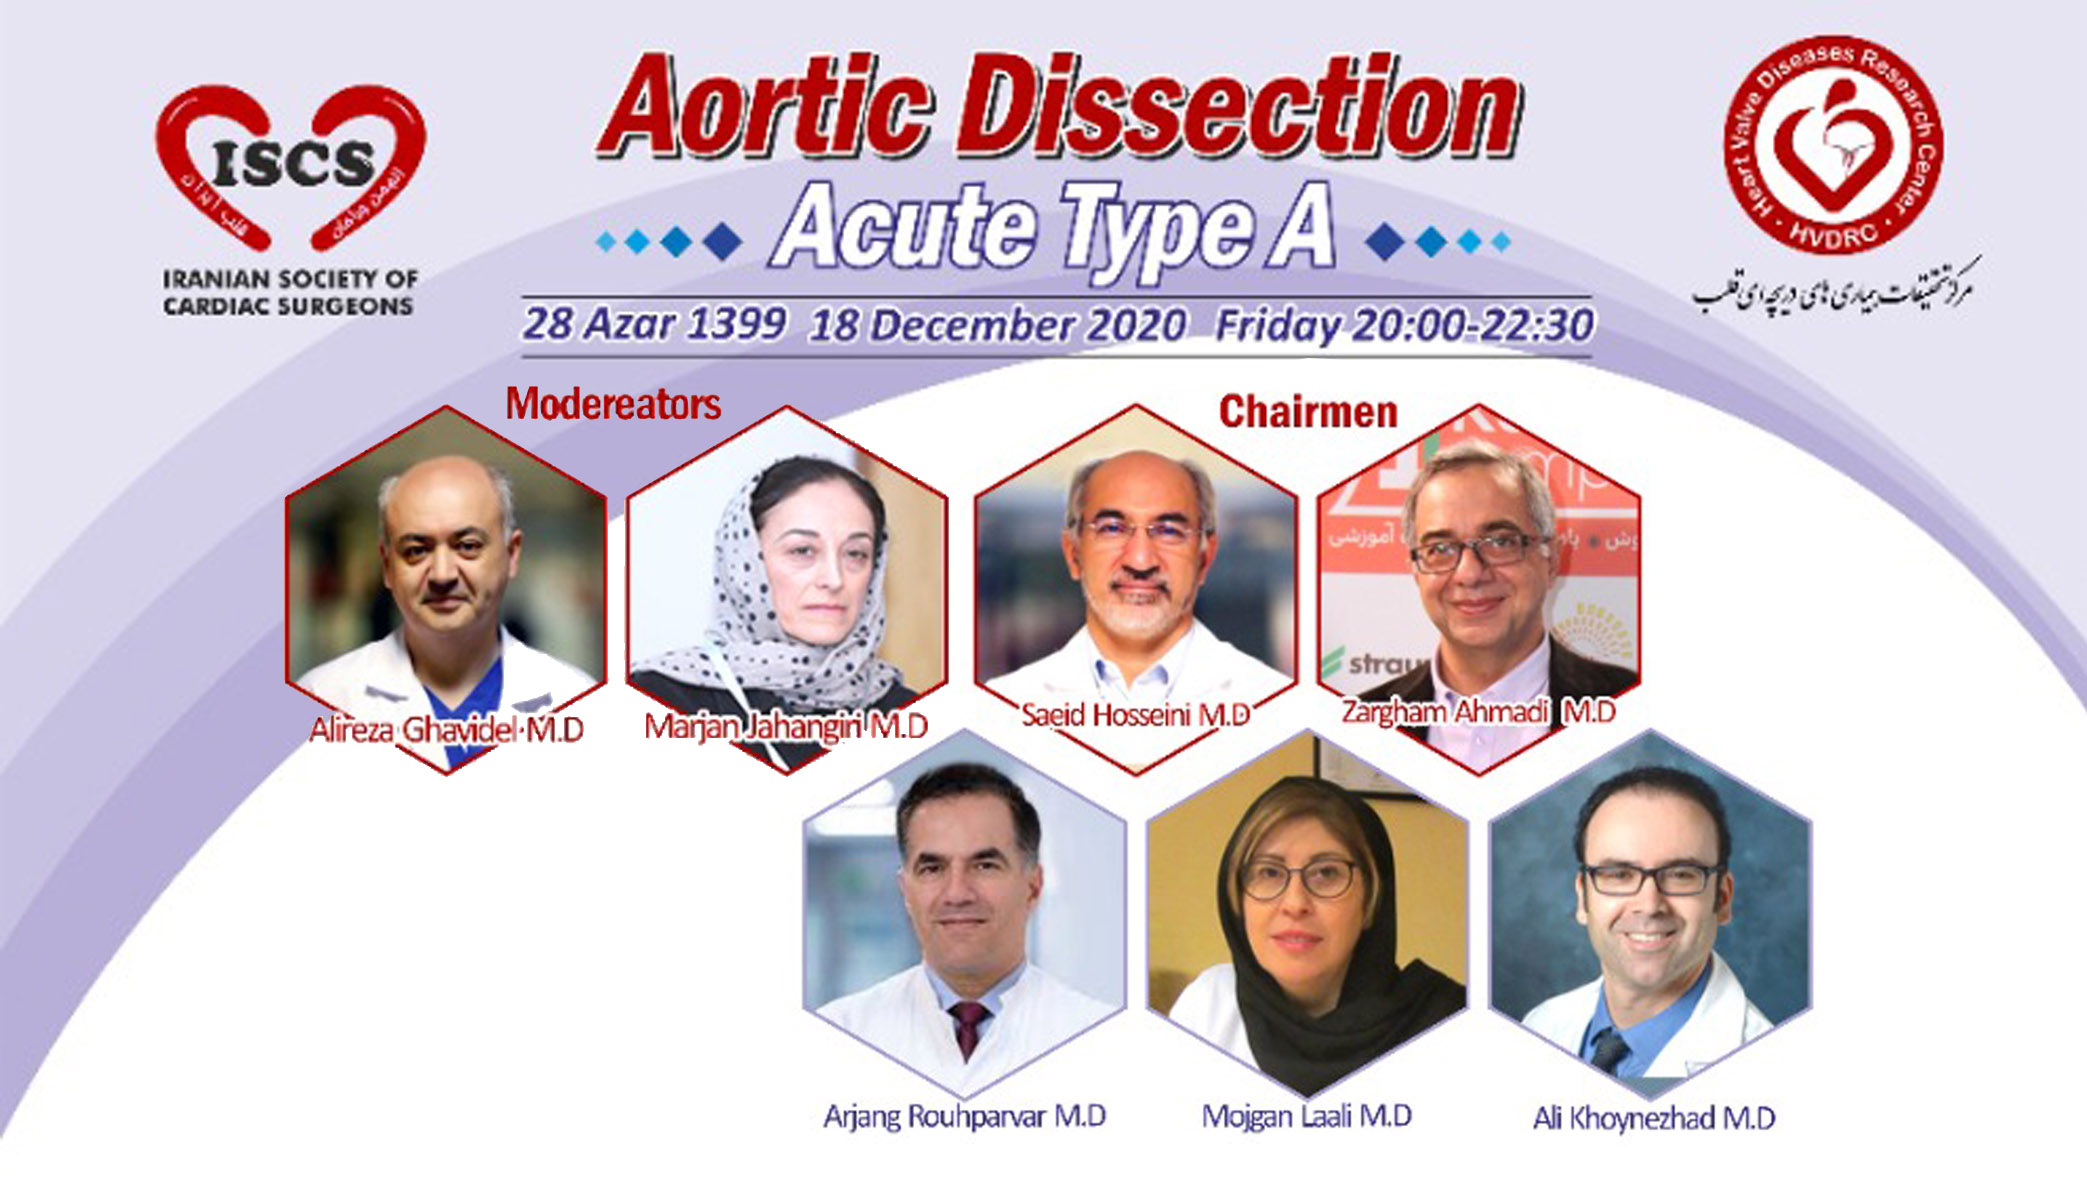 Aortic Dissection Acute Type A